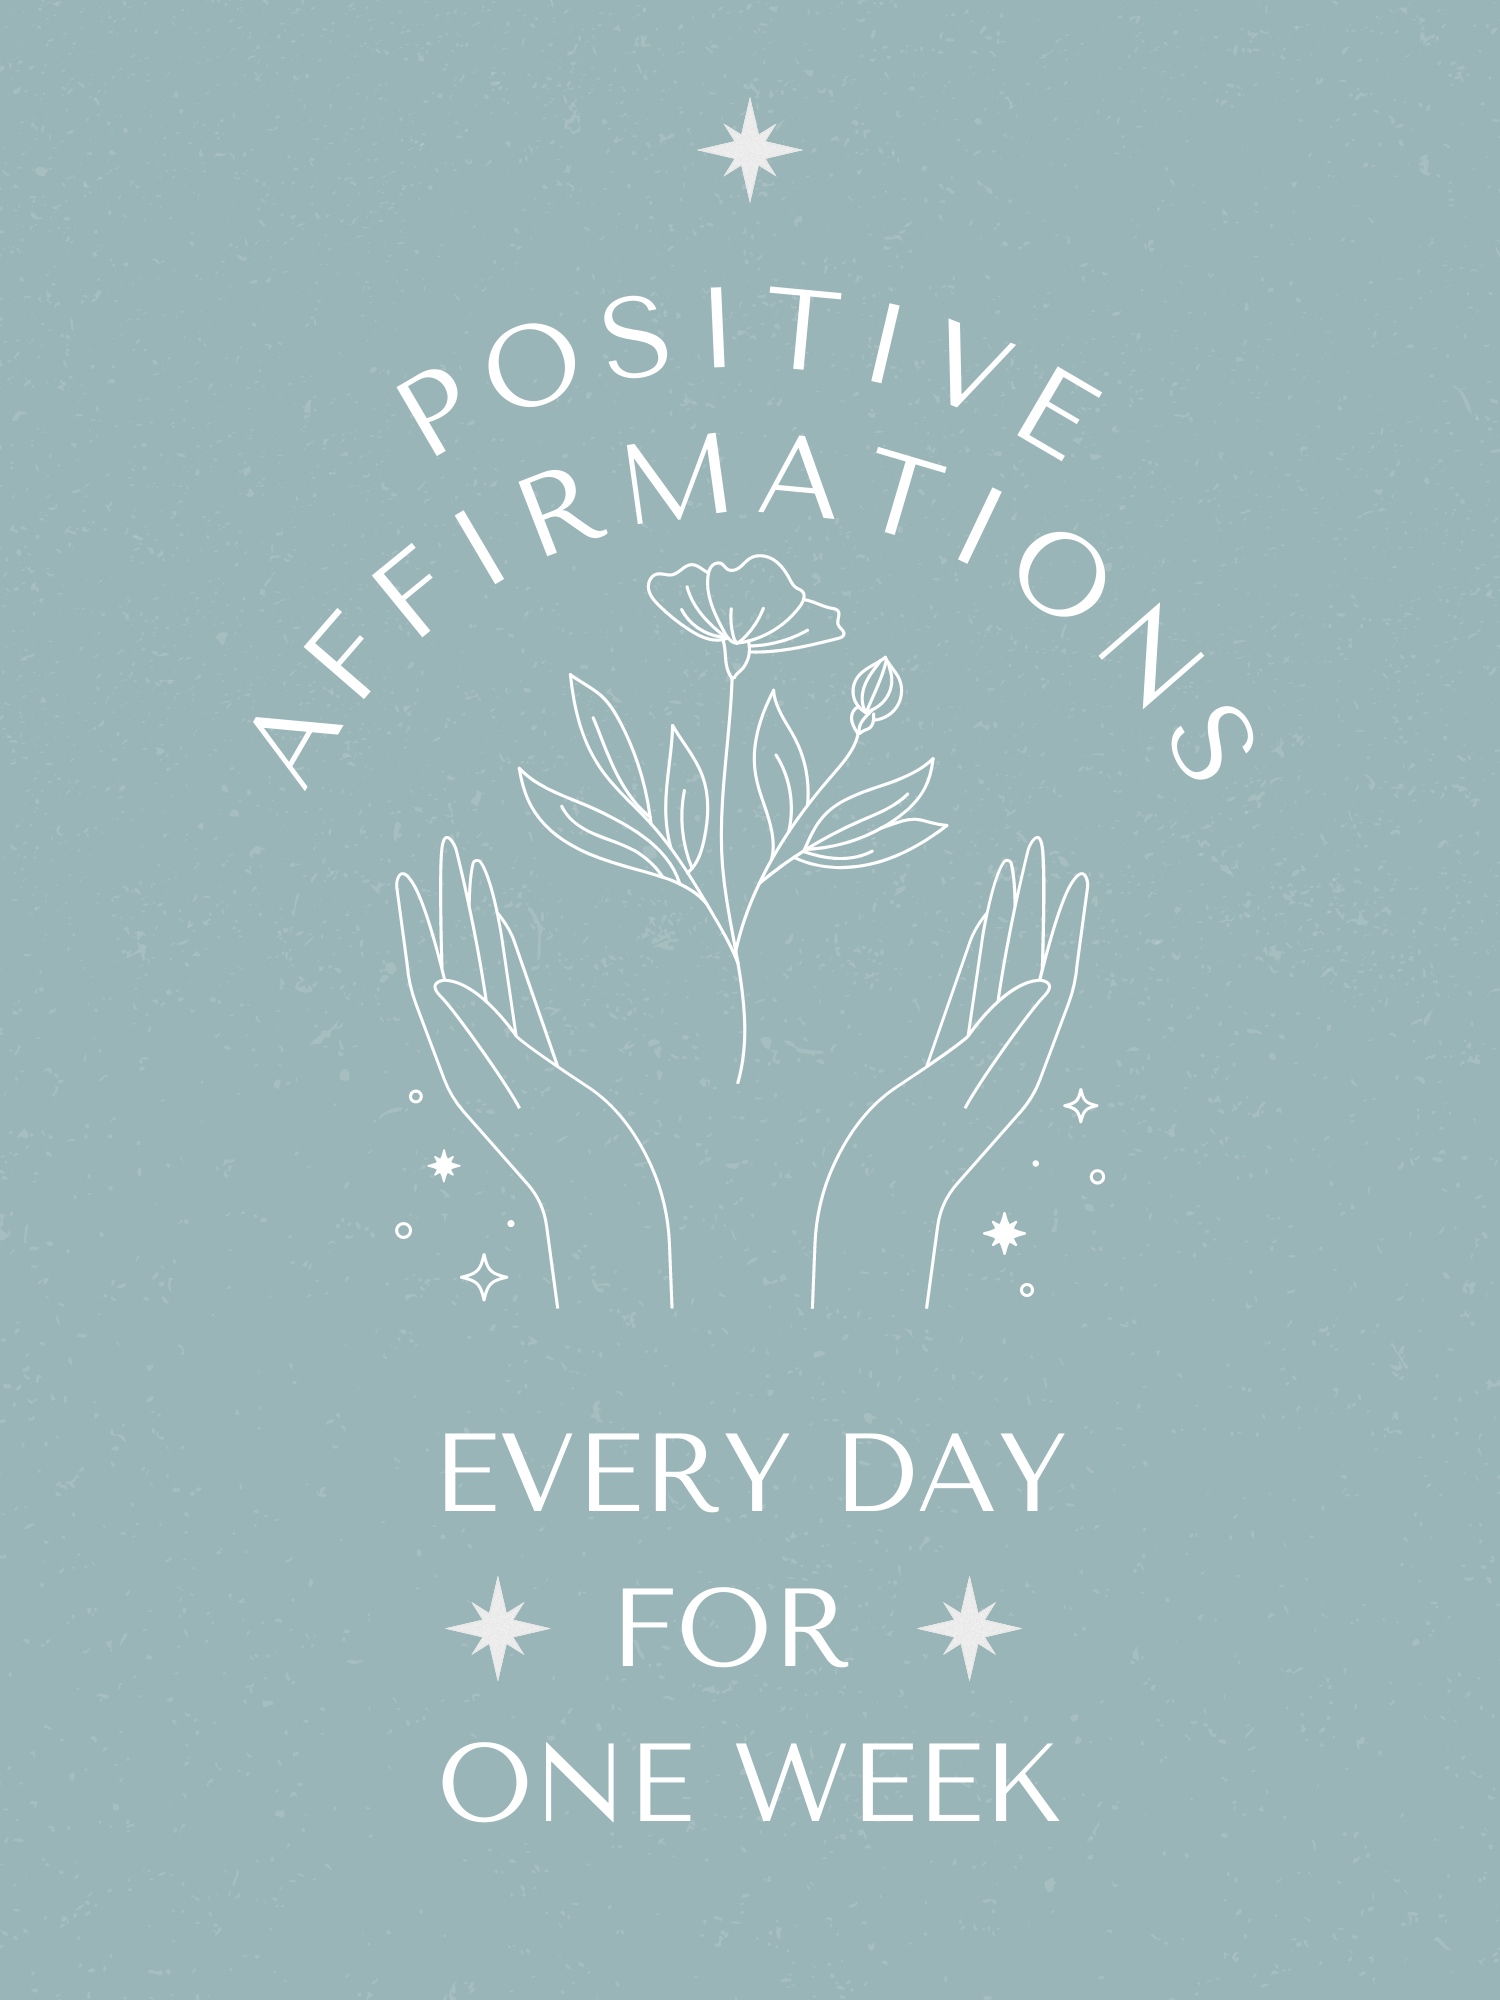 Affirmations for women